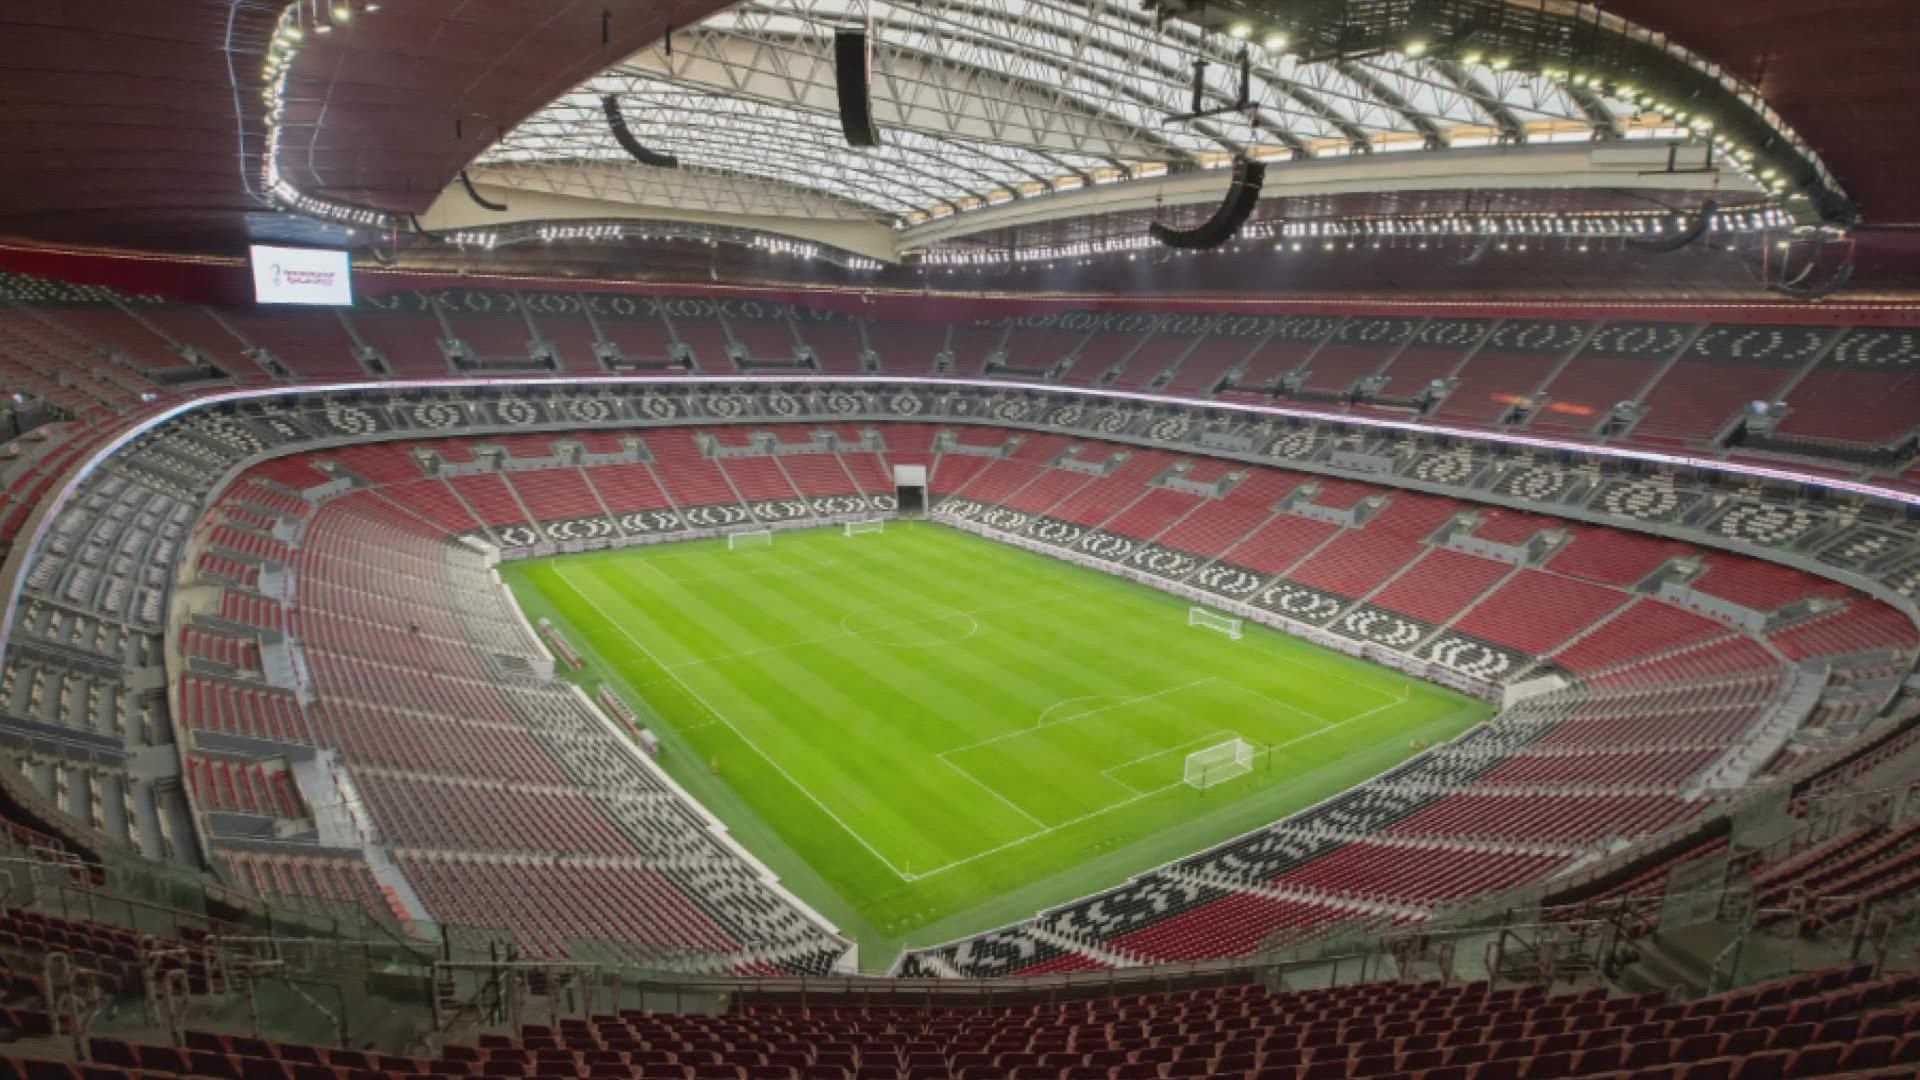 Colorado-based engineering company ME Engineers helped design Al Bayt Stadium, which will host nine matches during the World Cup.